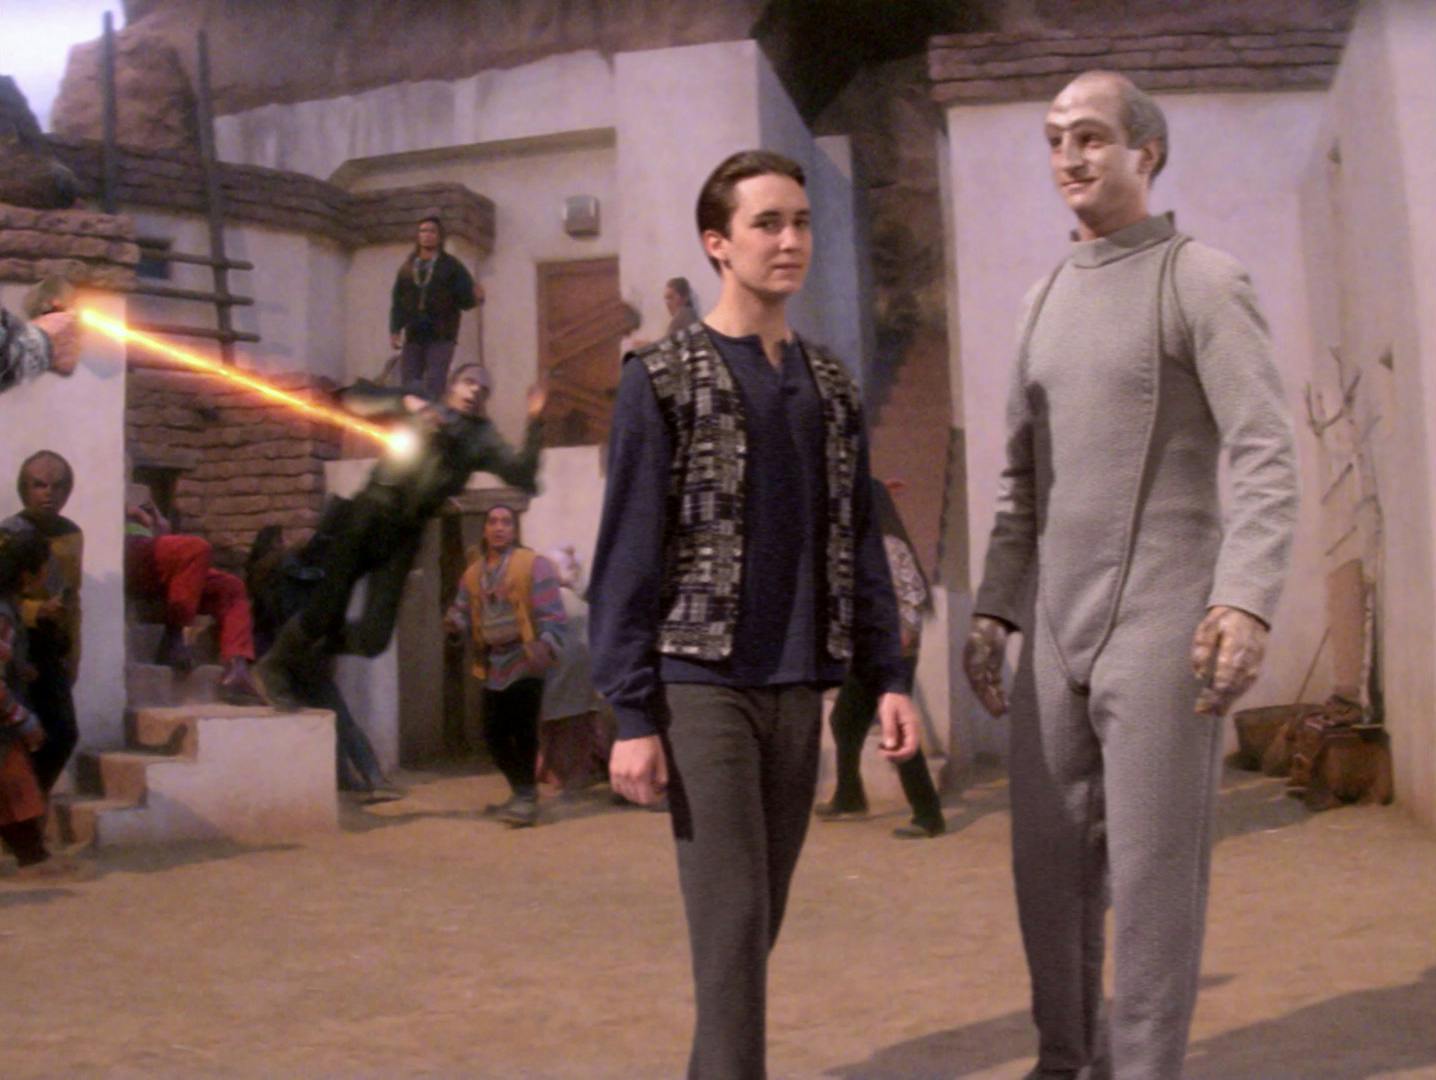 Wesley Crusher in local civilian attire walks away from a mele with the Cardassians with The Traveler in 'Journey's End'